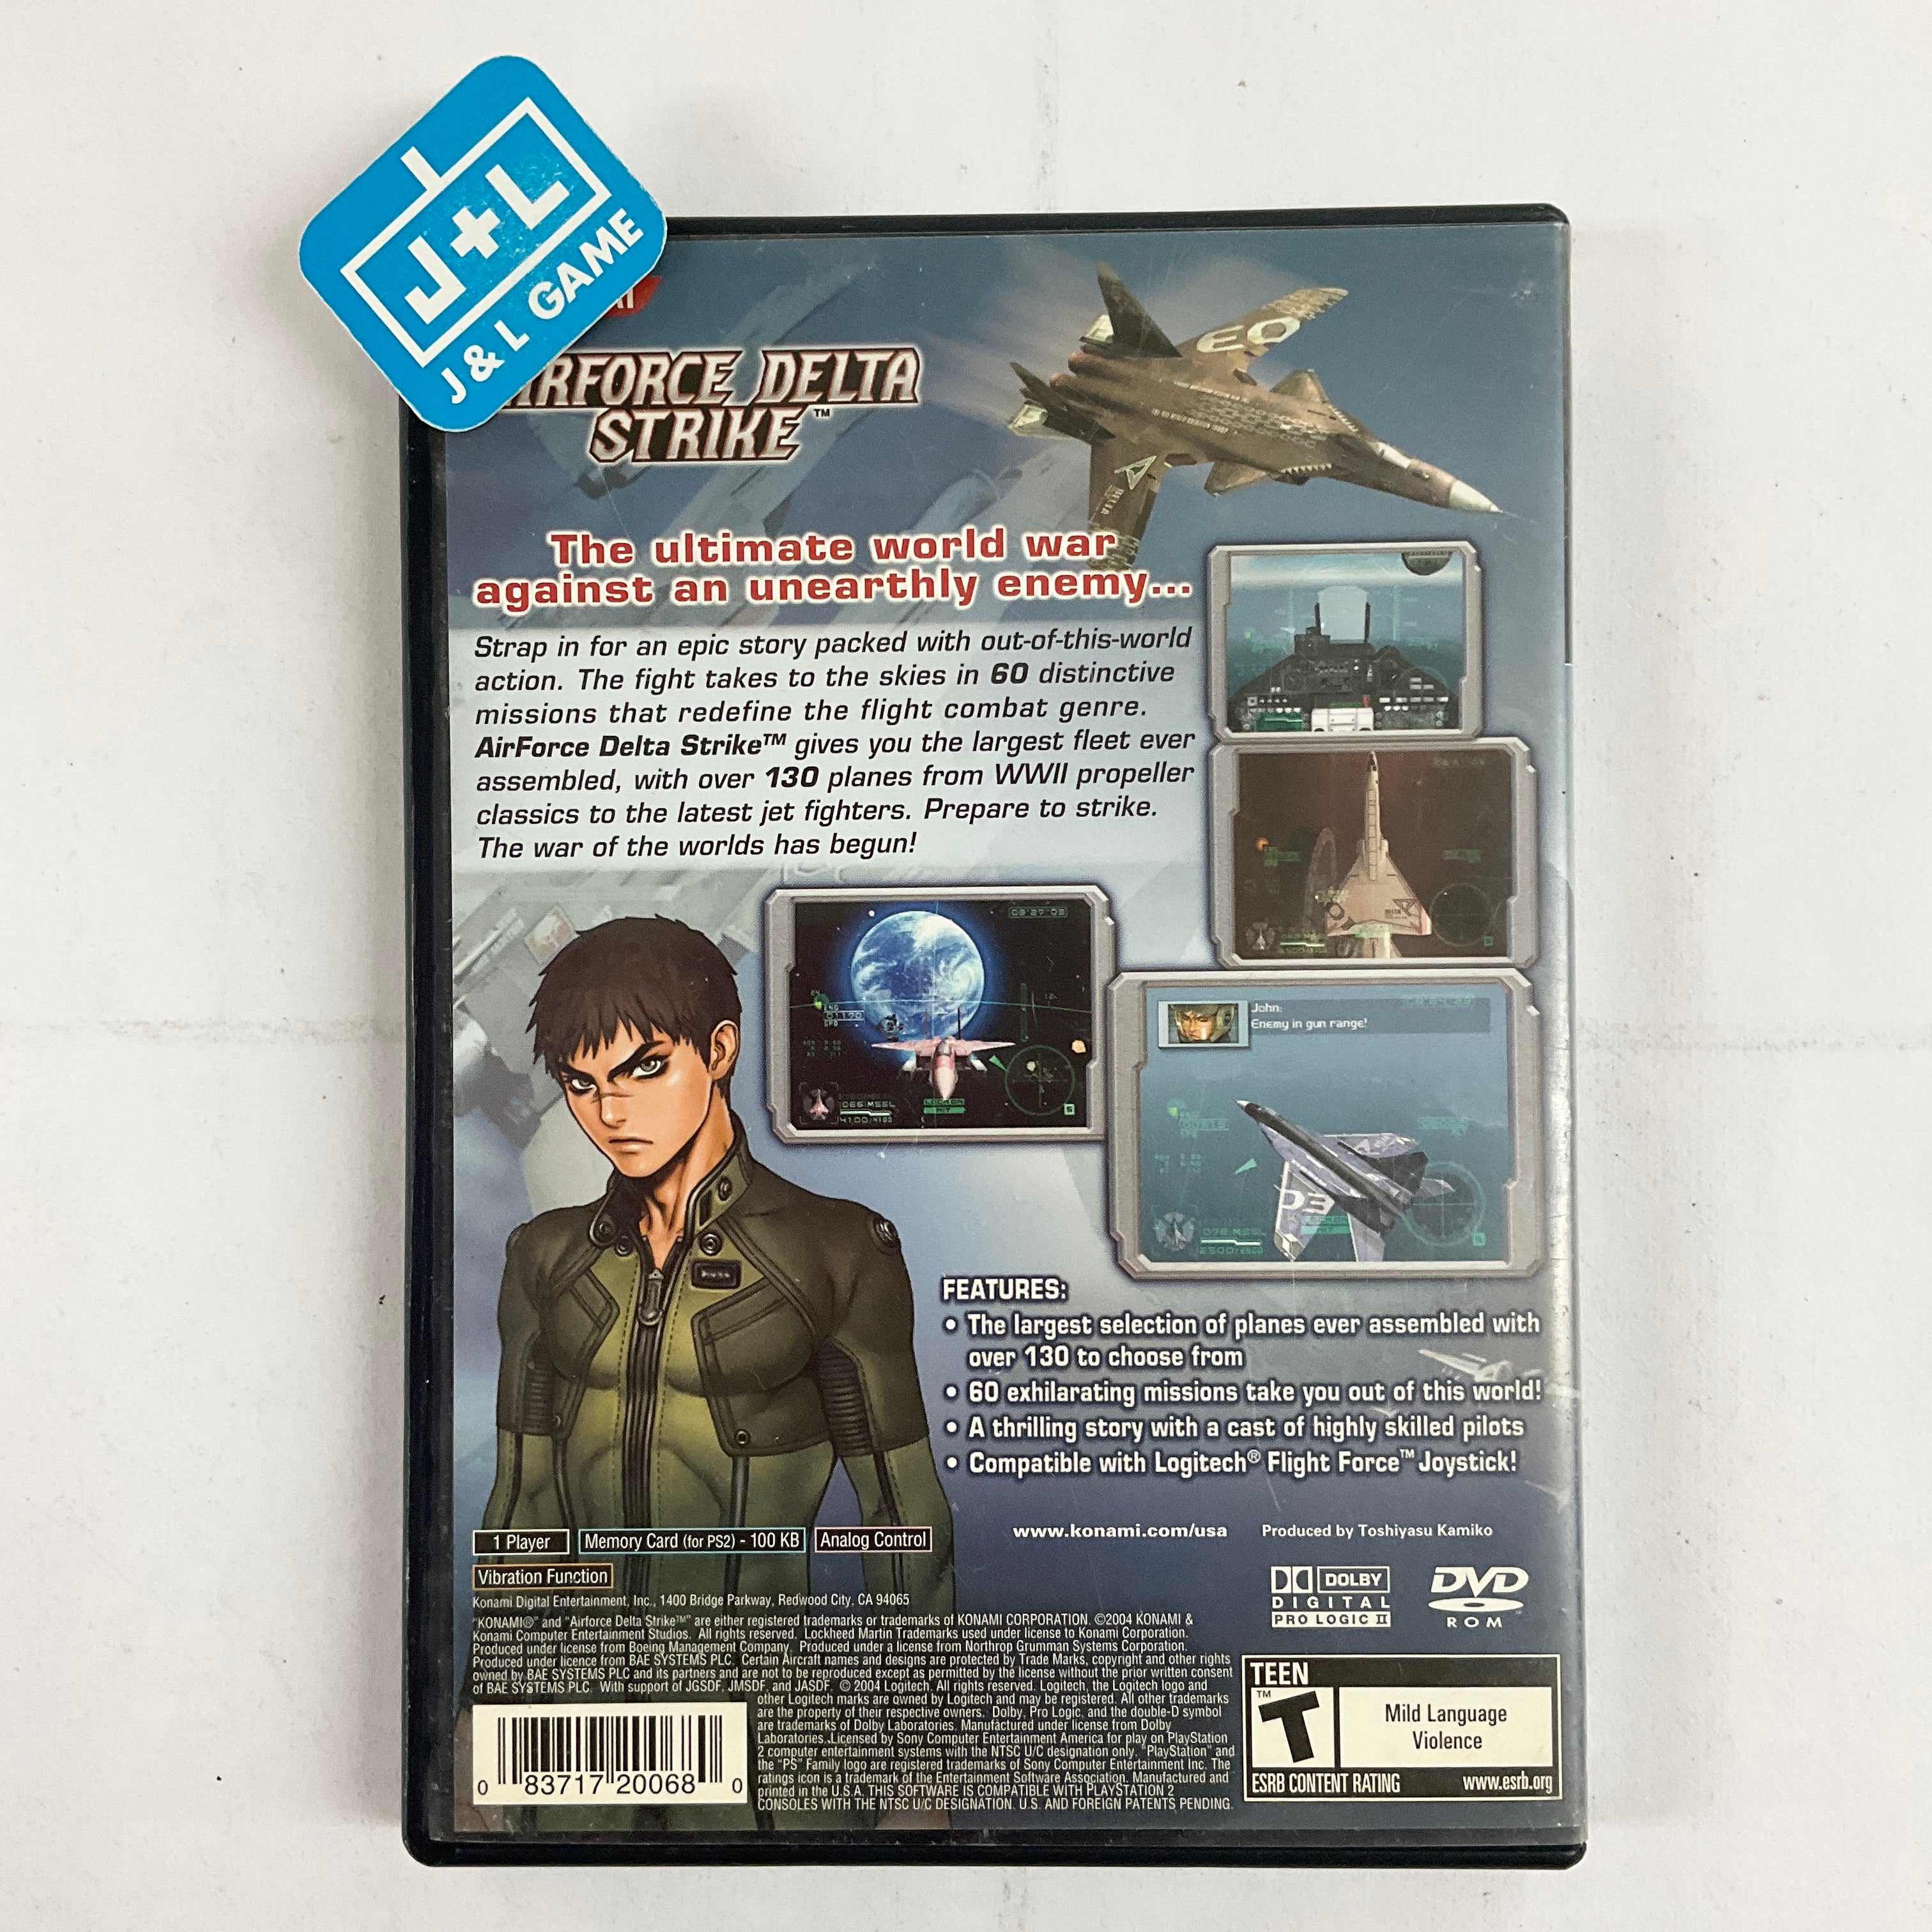 AirForce Delta Strike - (PS2) PlayStation 2 [Pre-Owned] Video Games Konami   